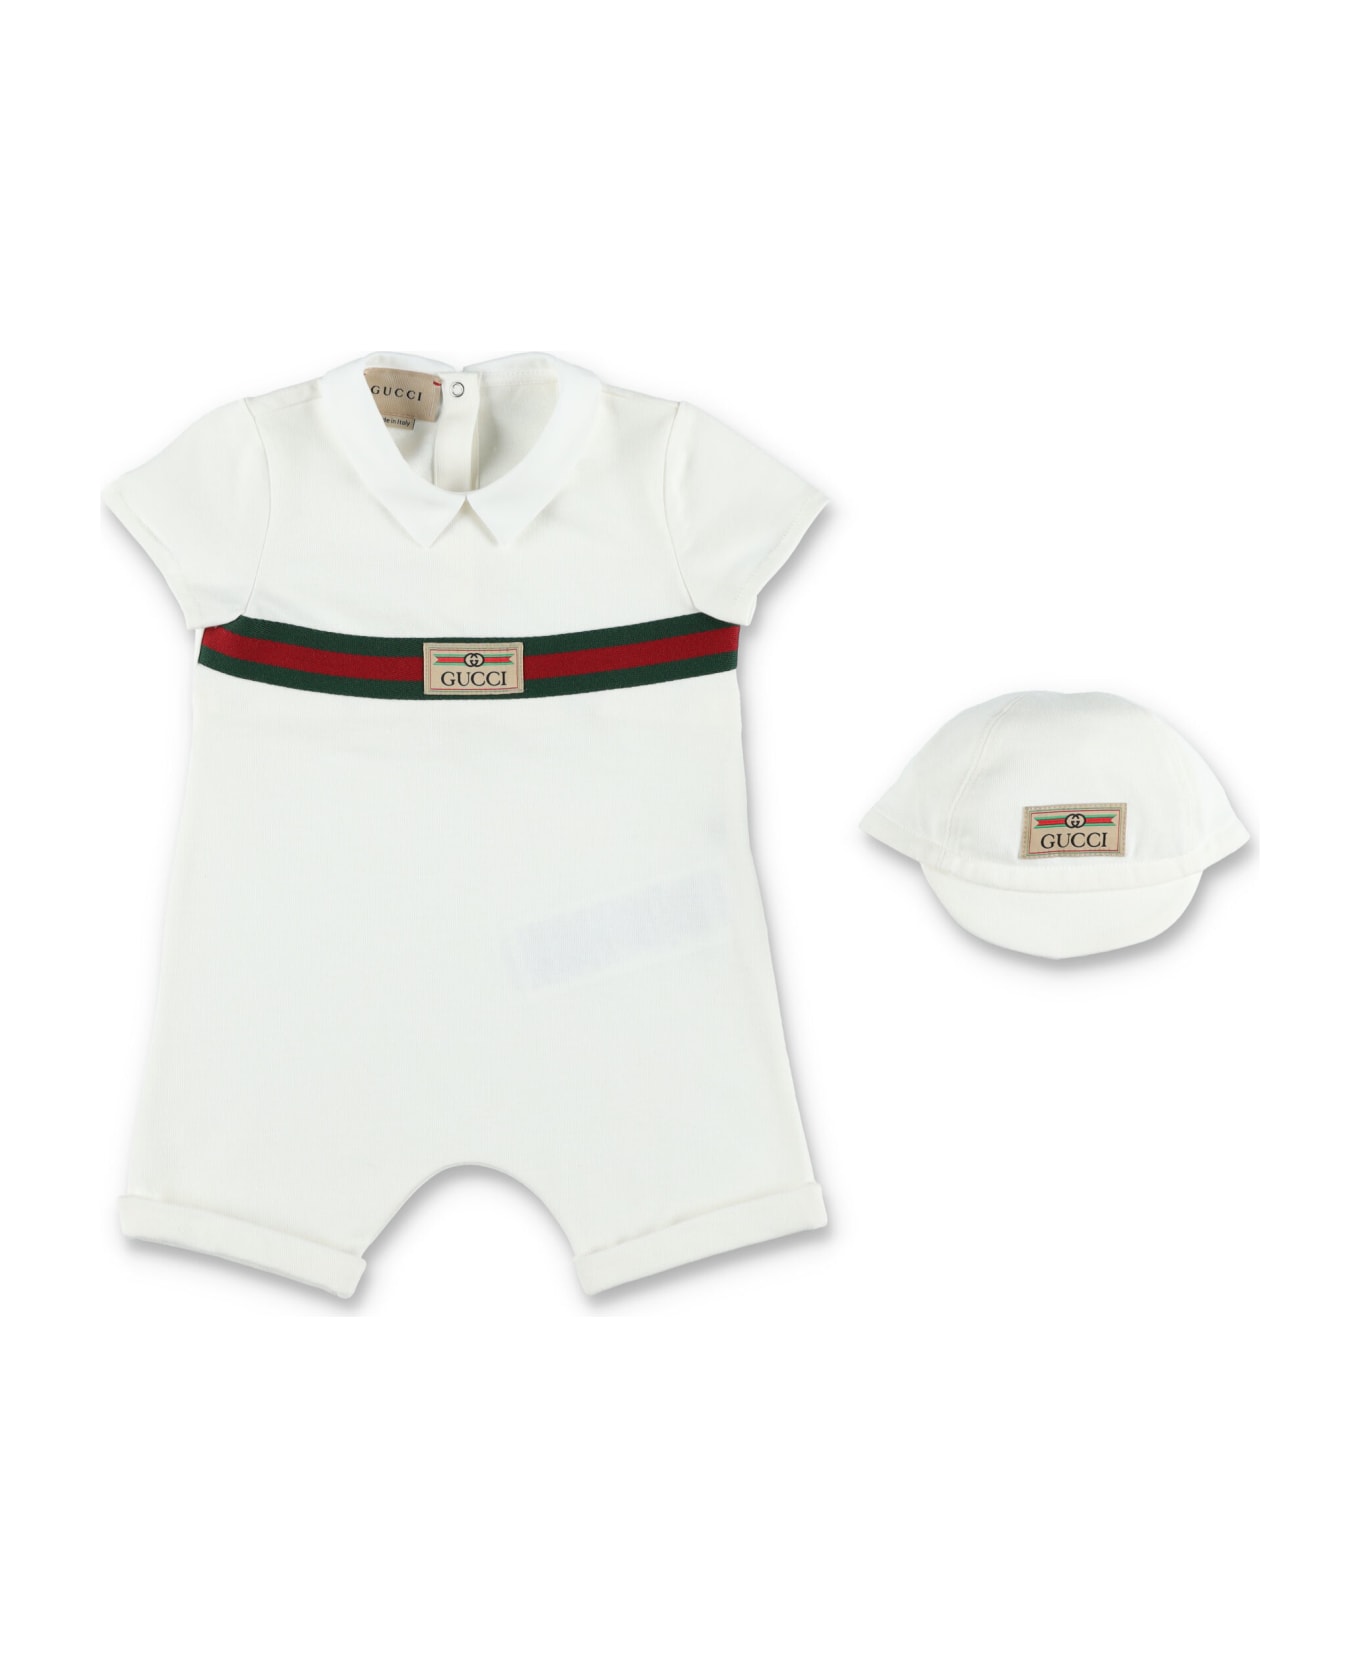 Gucci Body And Hat Set - White